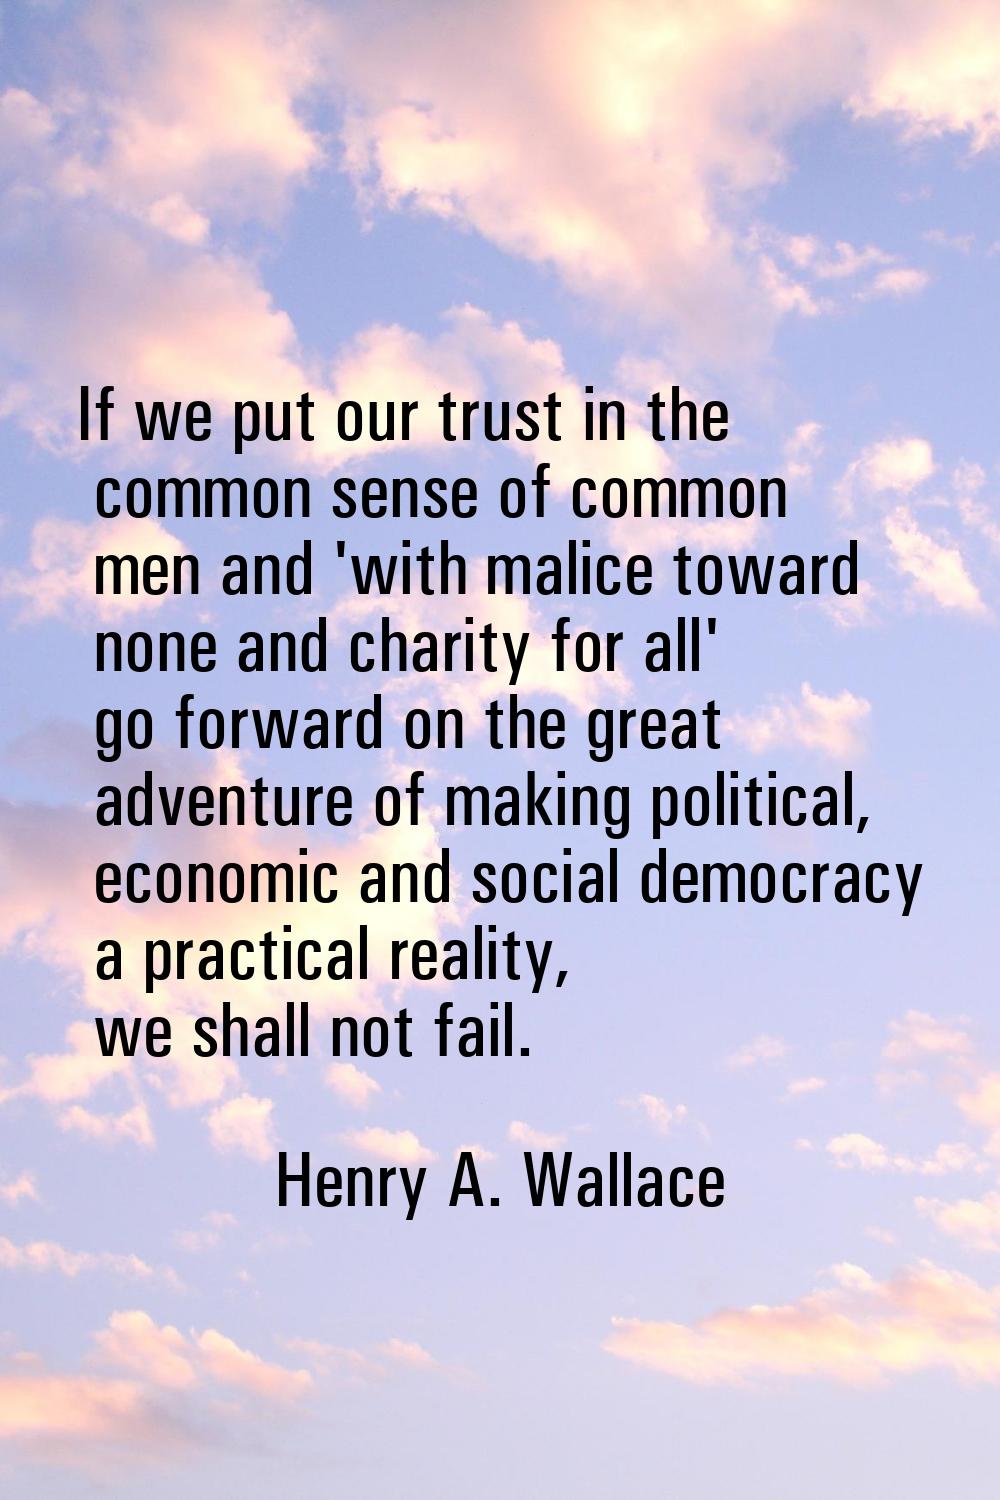 If we put our trust in the common sense of common men and 'with malice toward none and charity for 